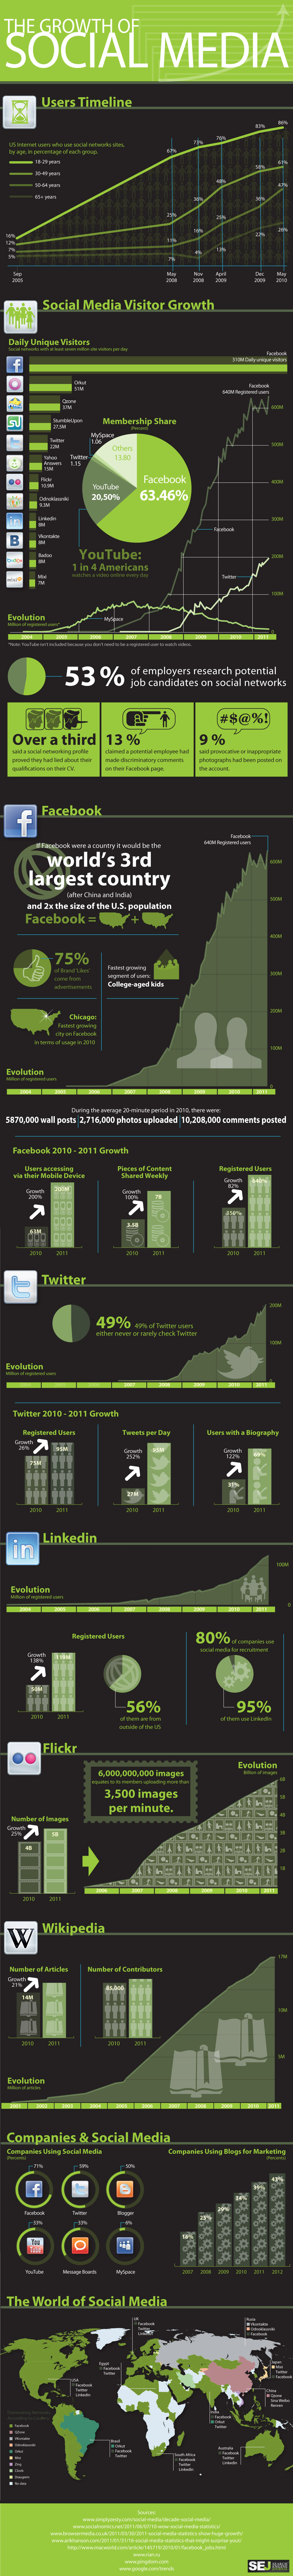 The Growth of Social Media: An Infographic